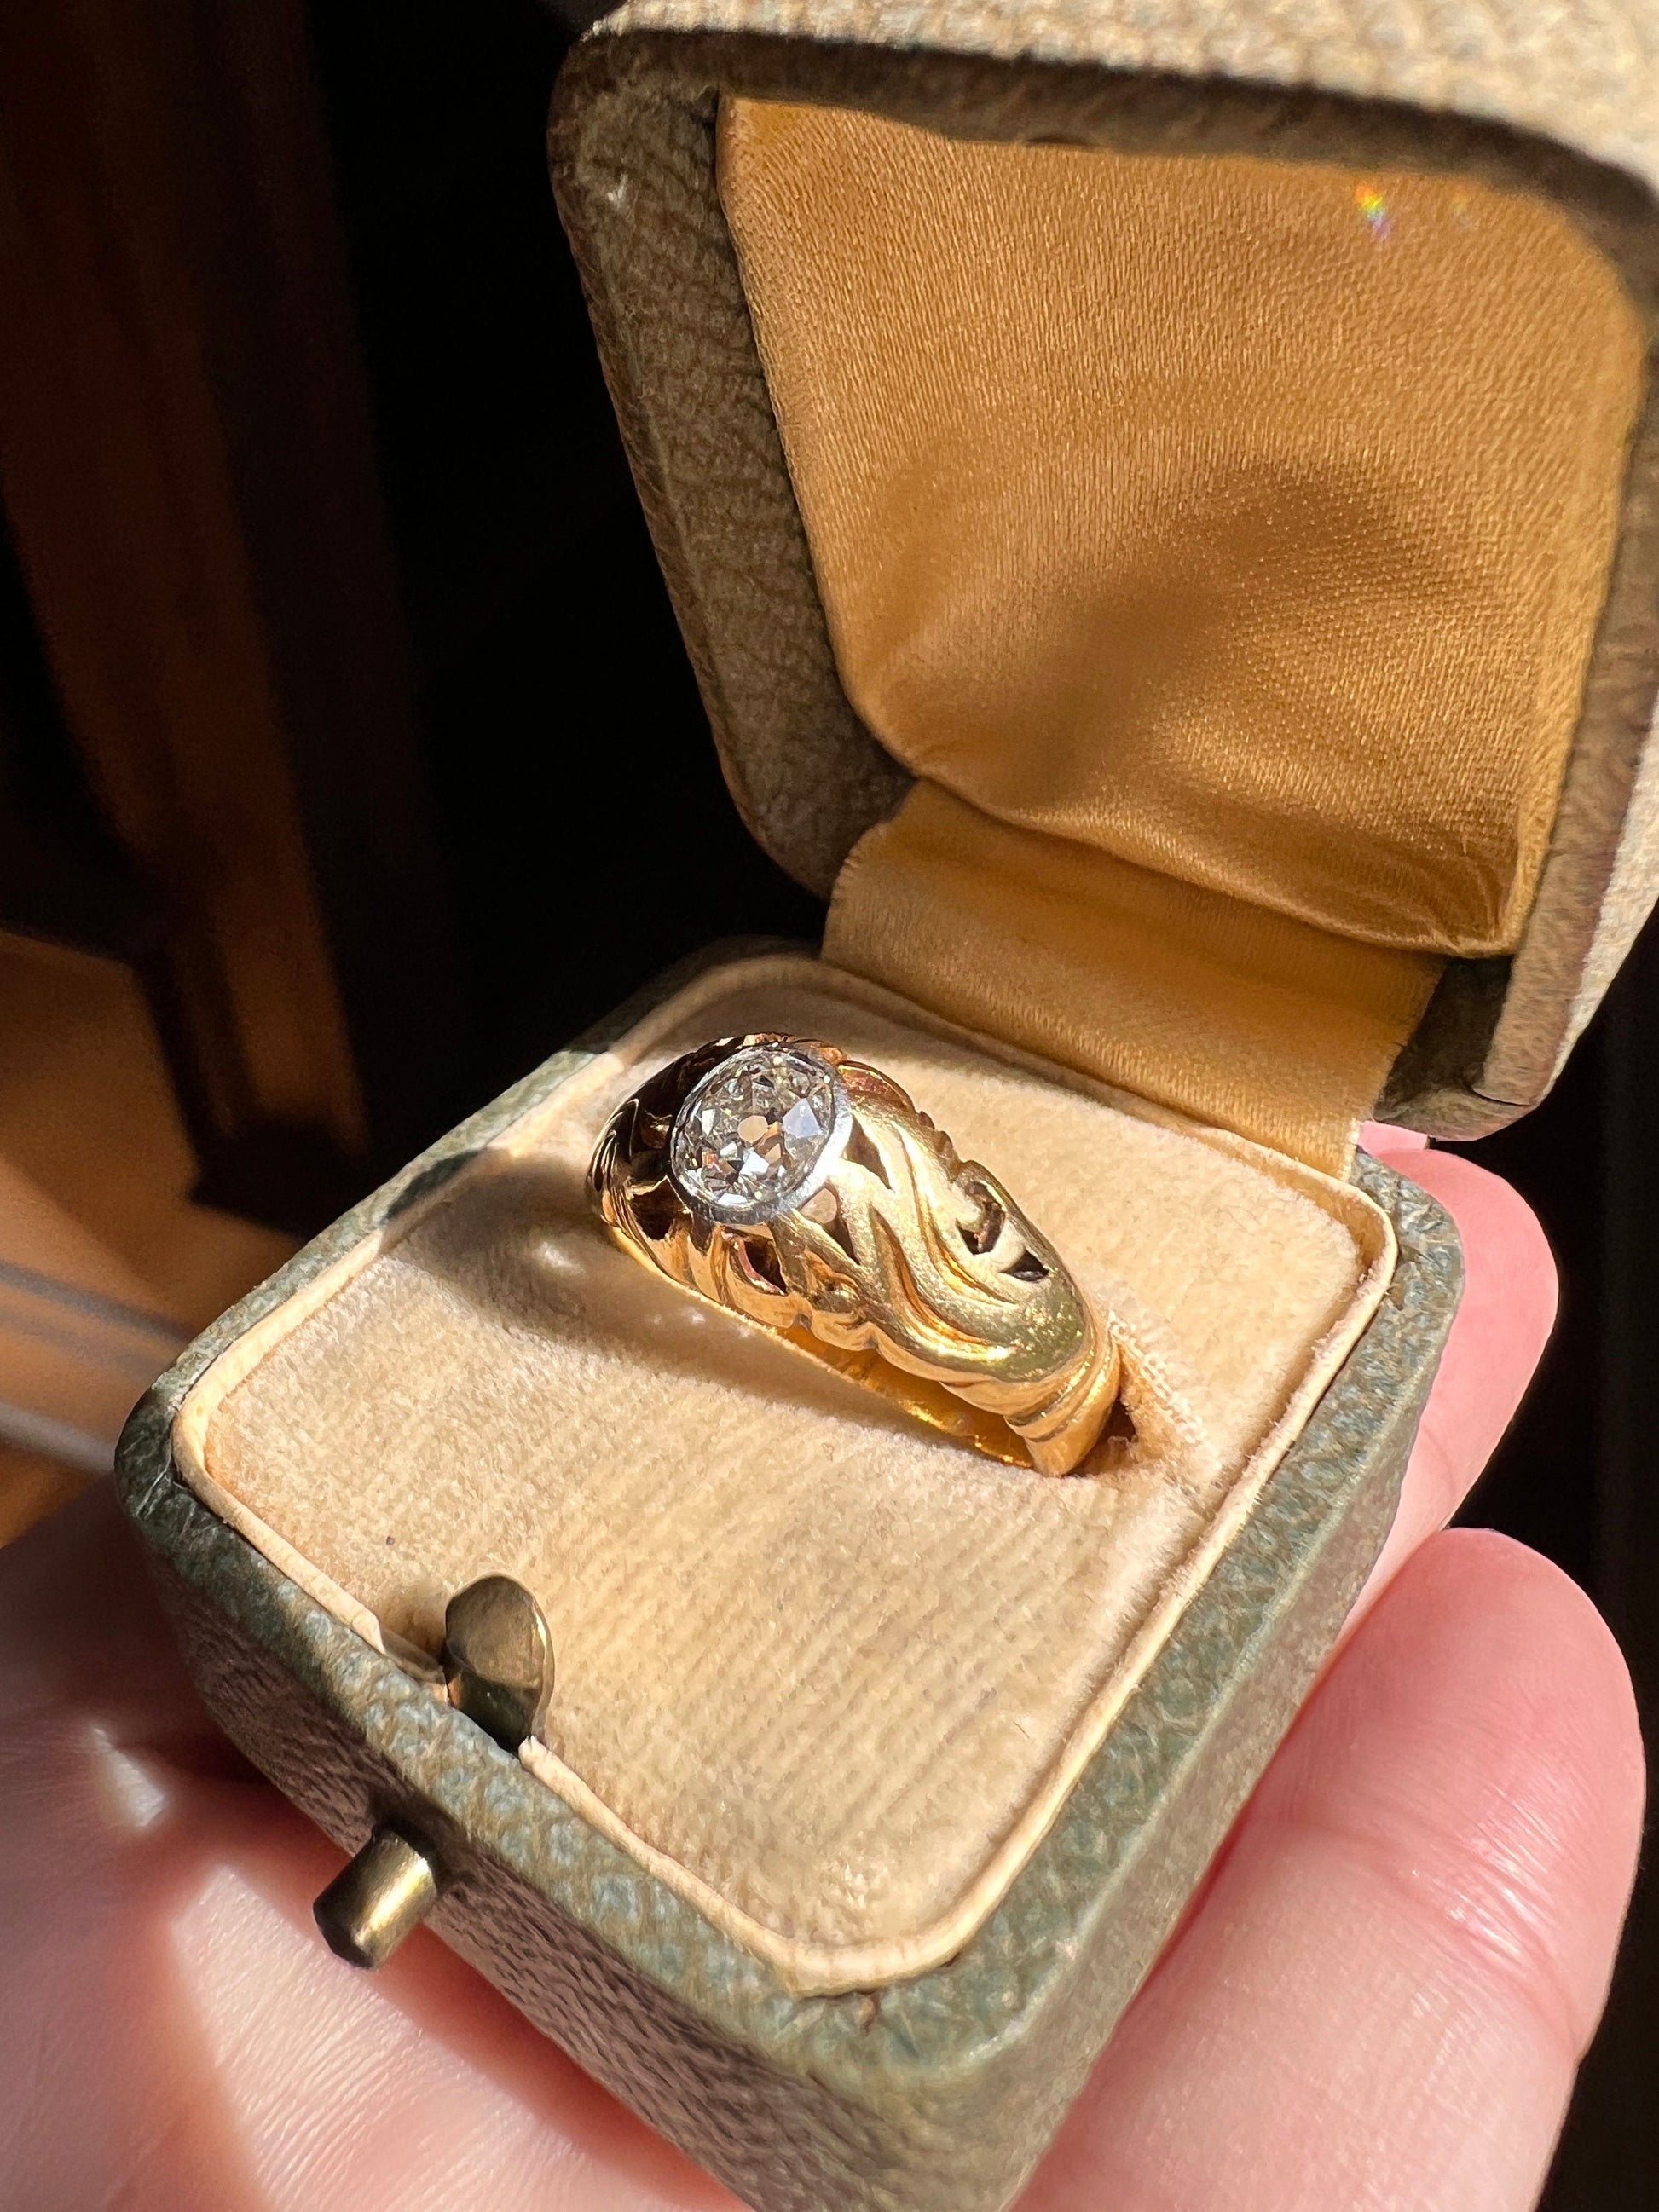 FIRE French Antique FLAMES .6 Carat Old Mine Cut DIAMOND 8.3g 18k Gold Platinum Ring .6Ctw Rare Unisex Gift Gypsy Wide Band Solitaire Heavy